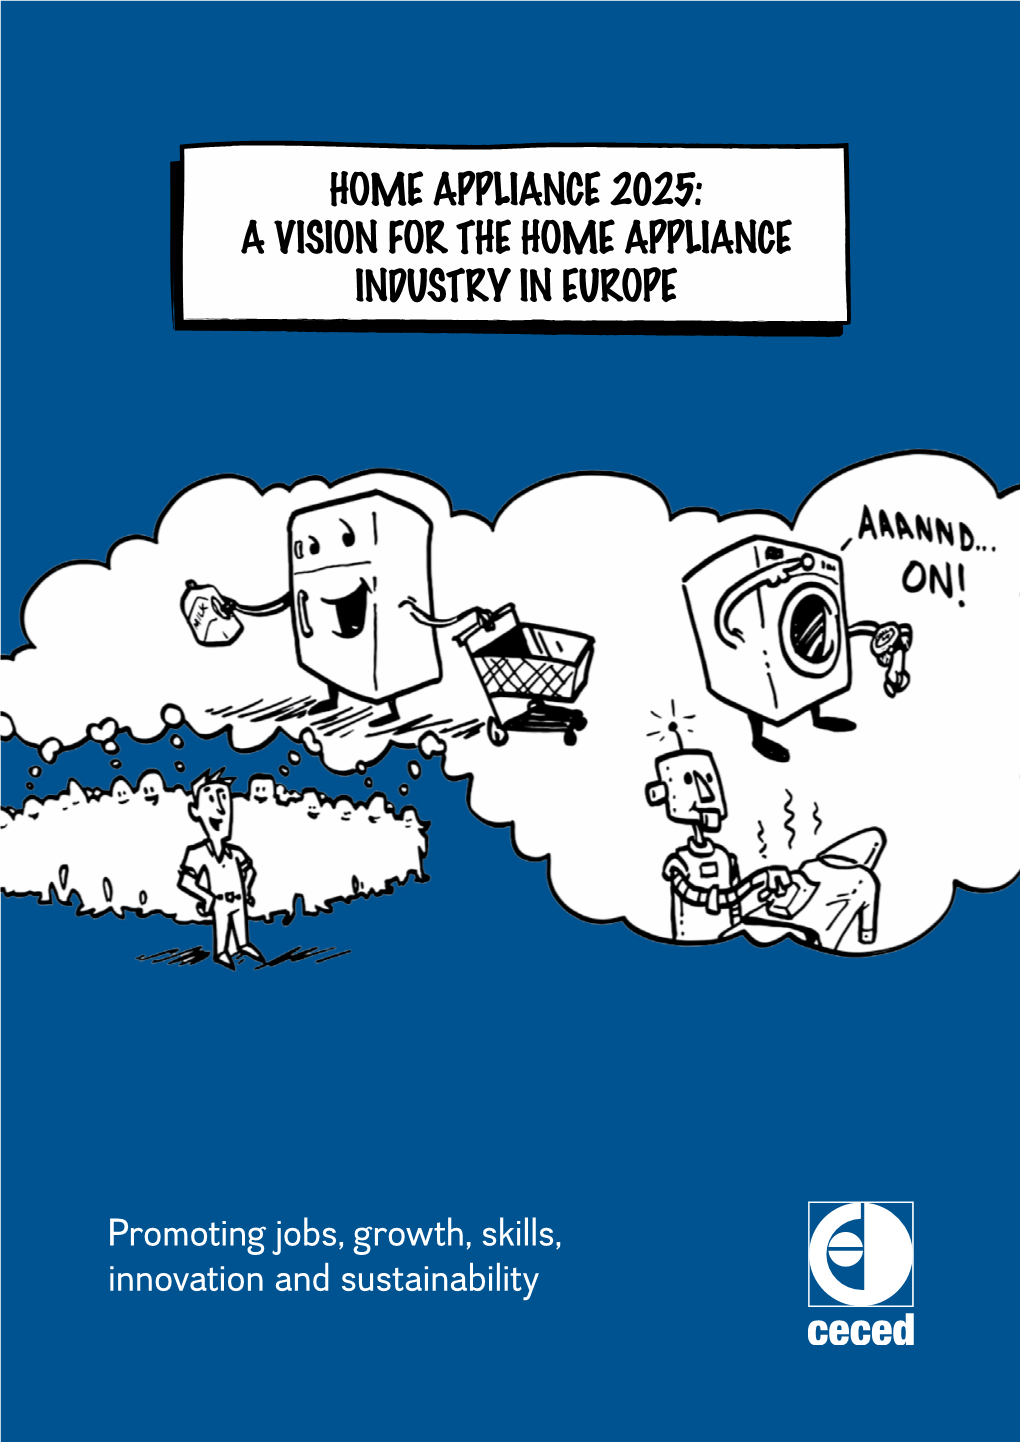 A Vision for the Home Appliance Industry in Europe